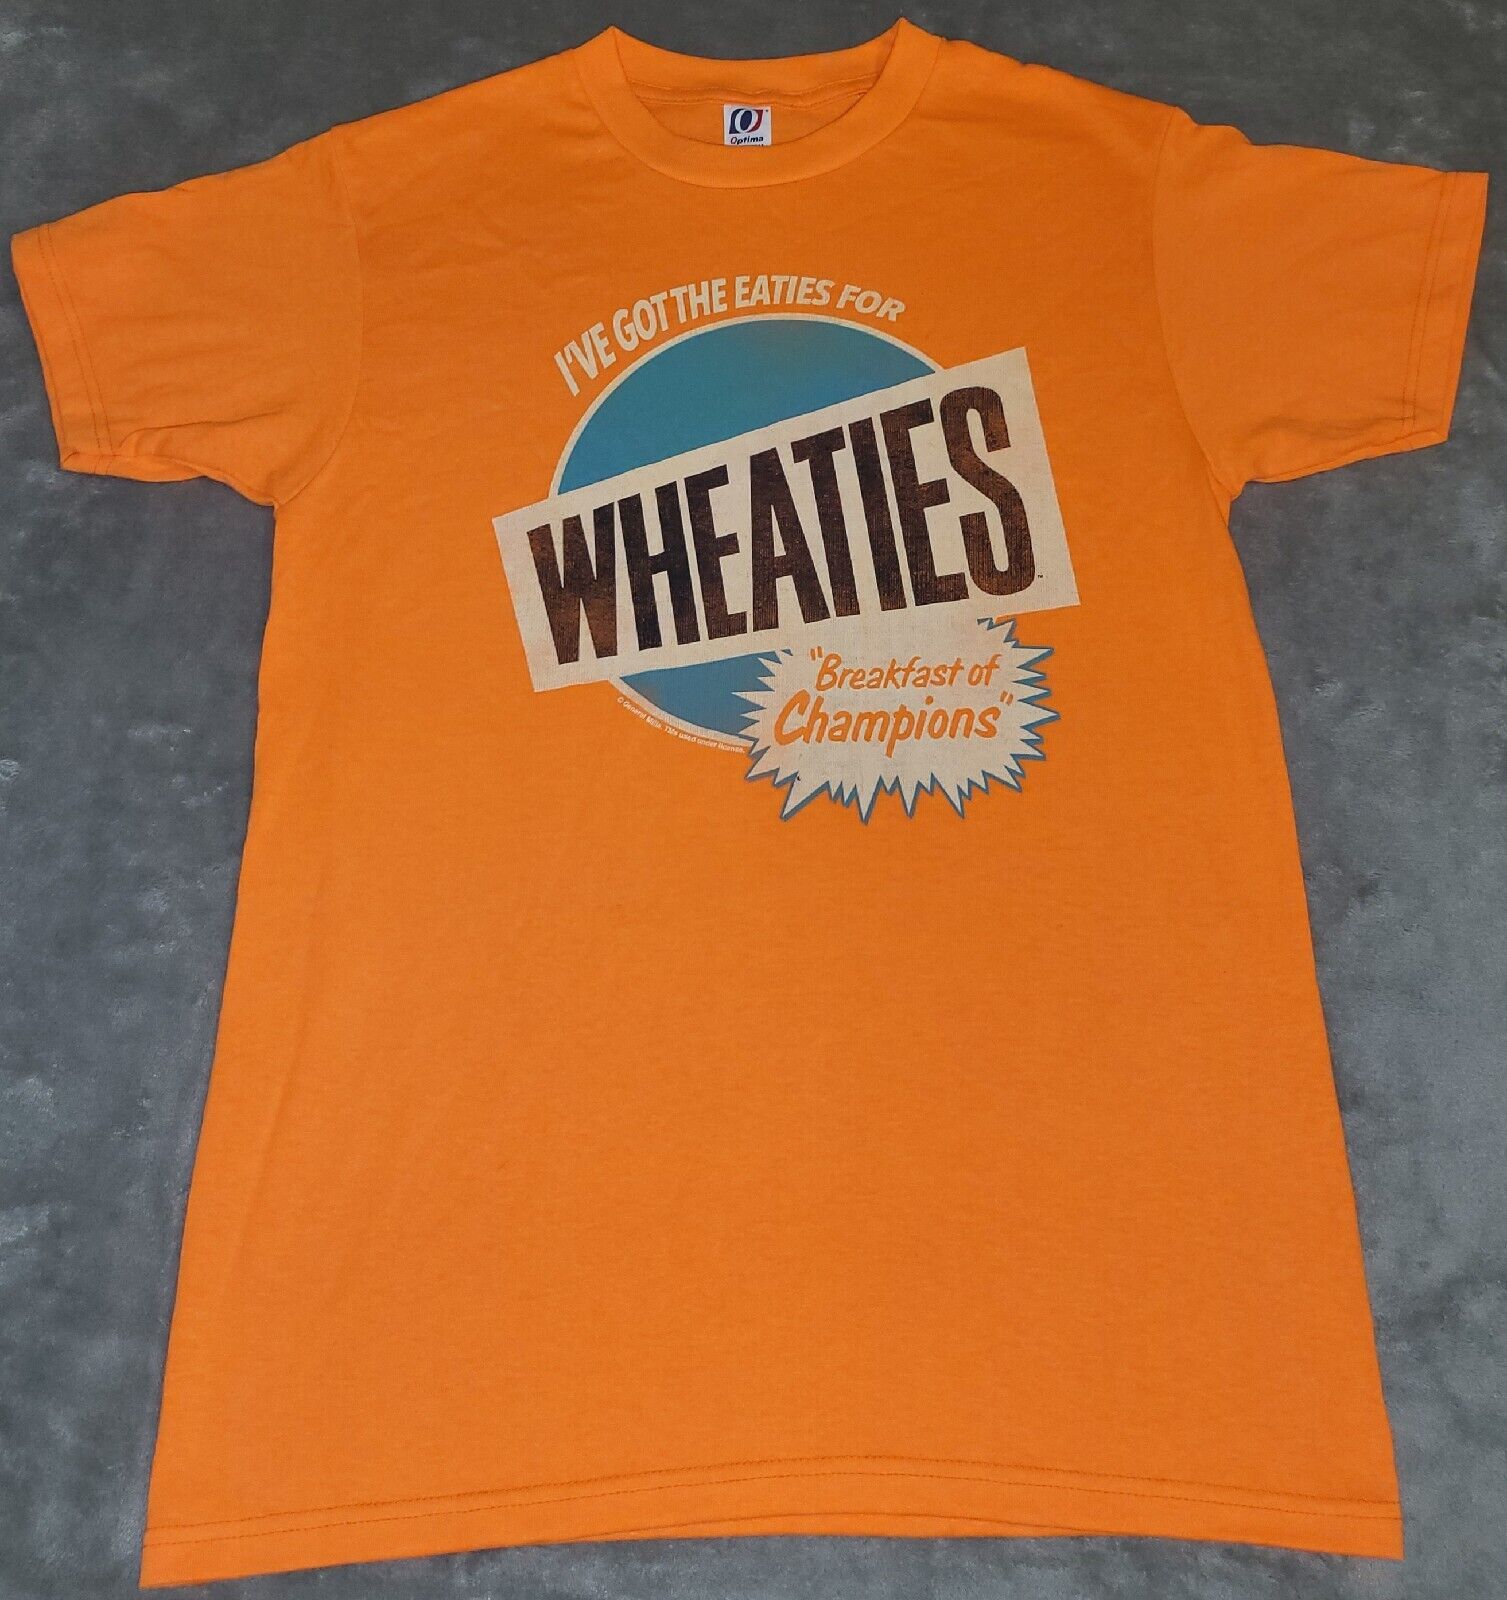 Vintage I've Got The Eaties For Wheaties T-Shirt Small Breakfast of Champions